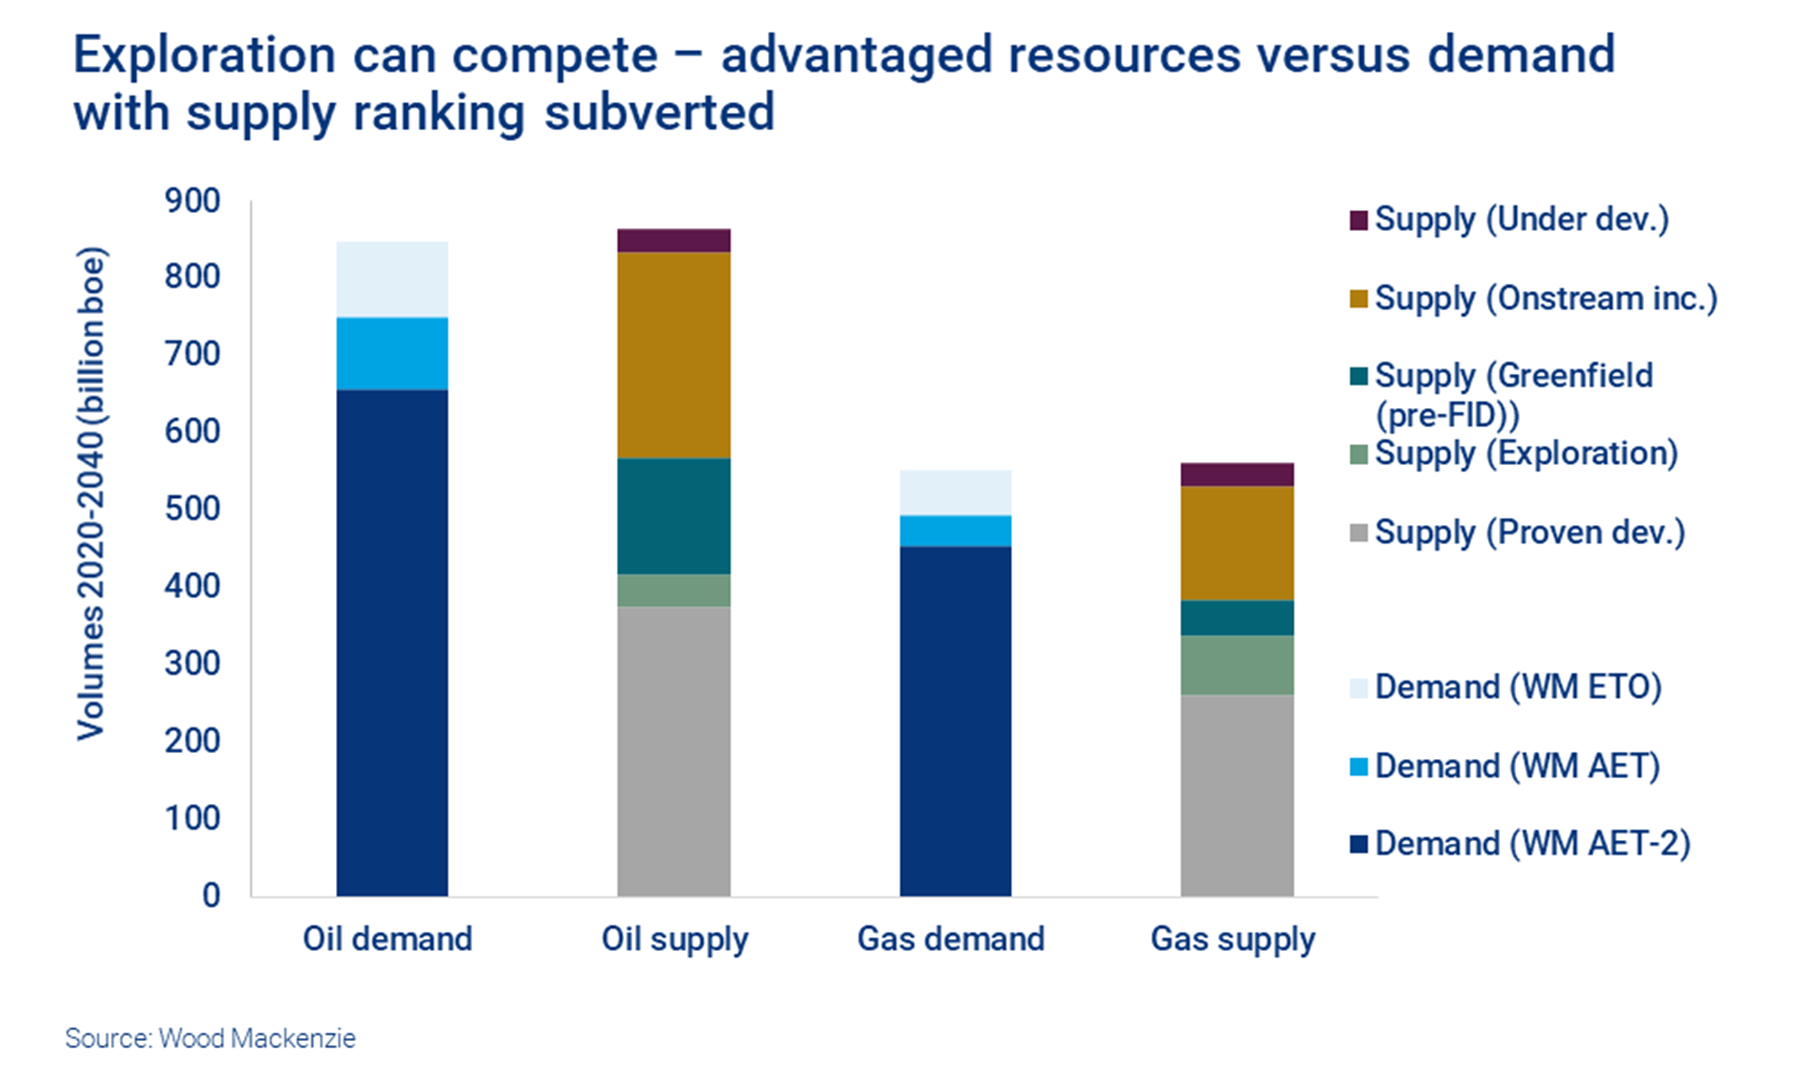 Exploration can compete – chart shows advantaged resources versus demand with supply ranking subverted